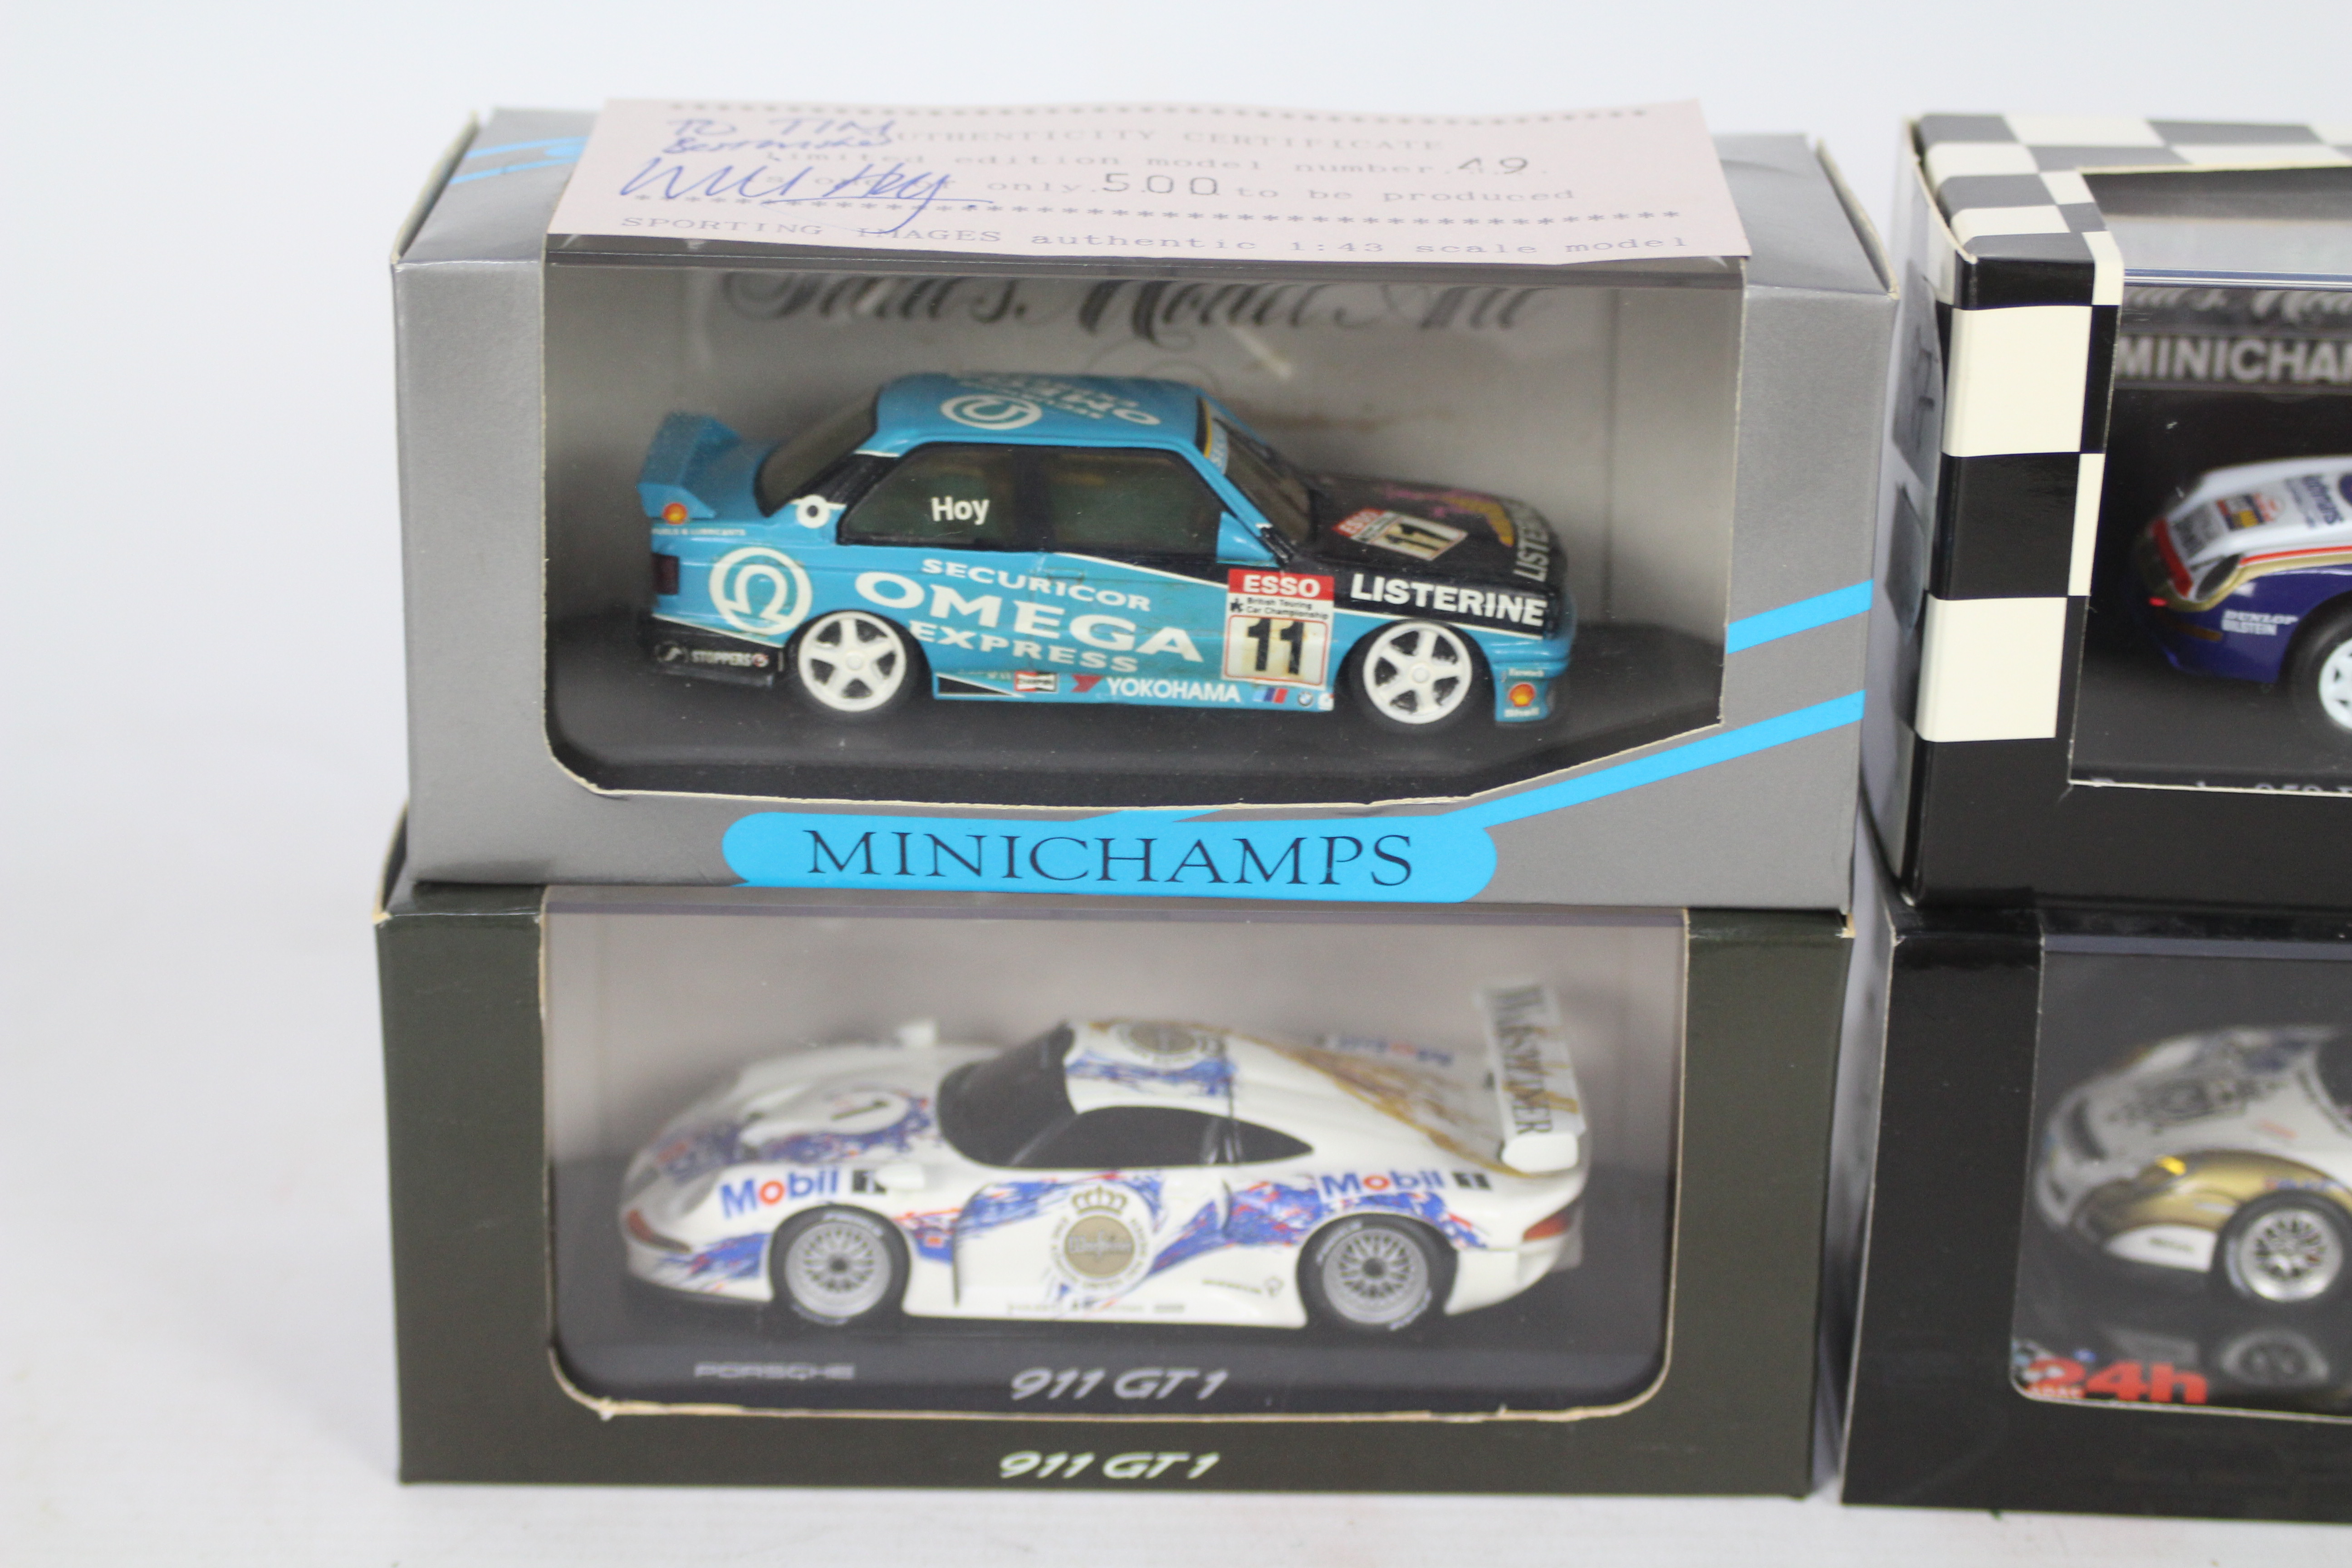 Minichamps - Four boxed 1:43 scale model sports cars from Minichamps. - Image 3 of 4